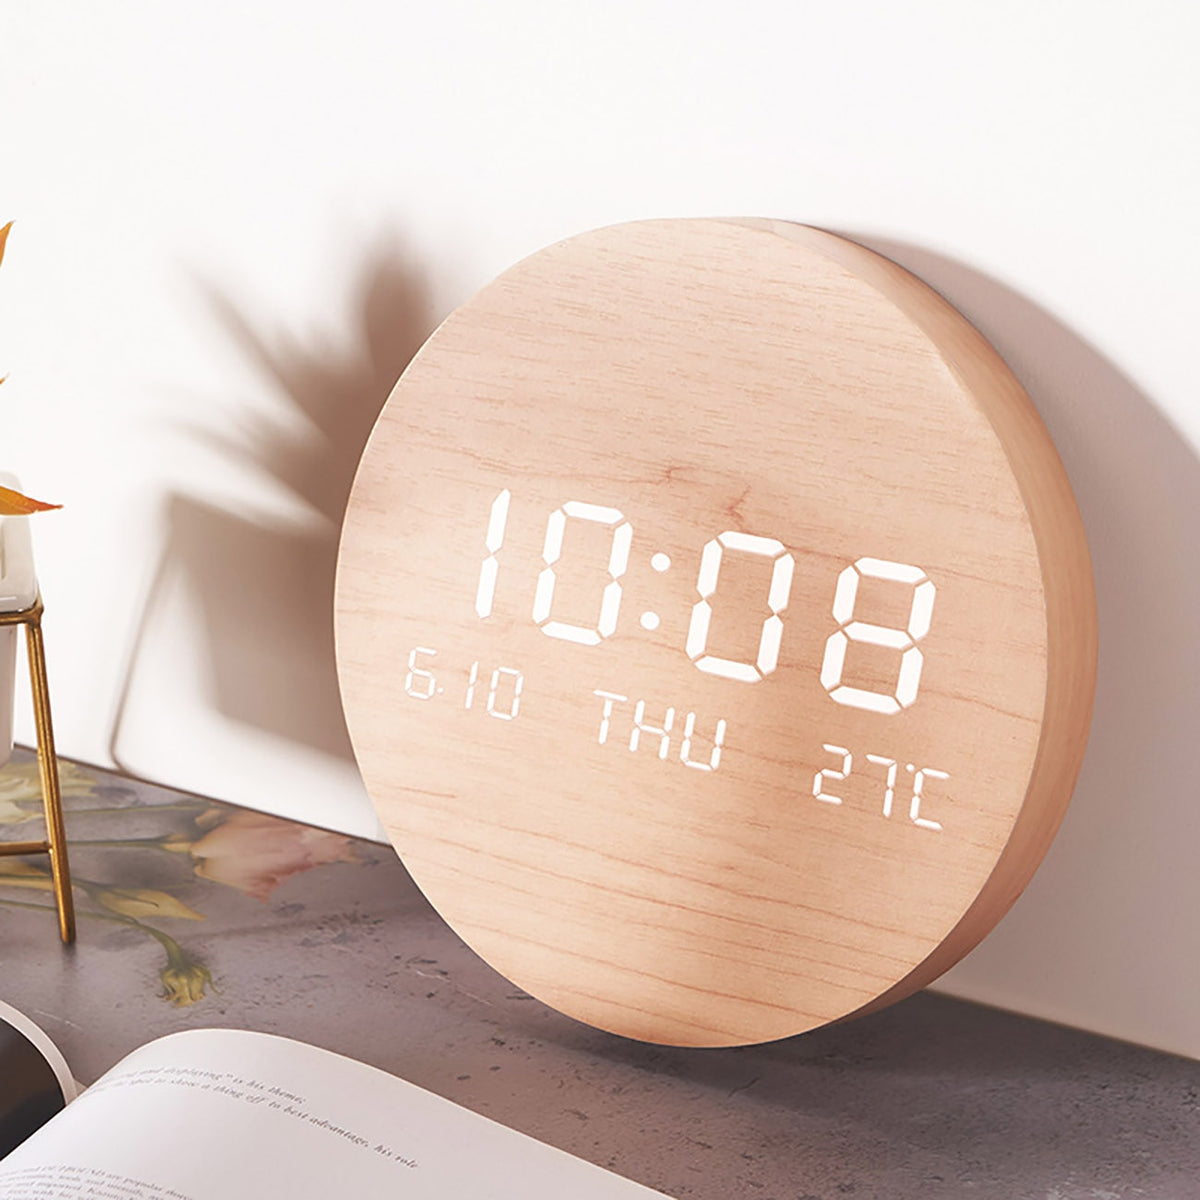 Led Wall Clock with features a silent